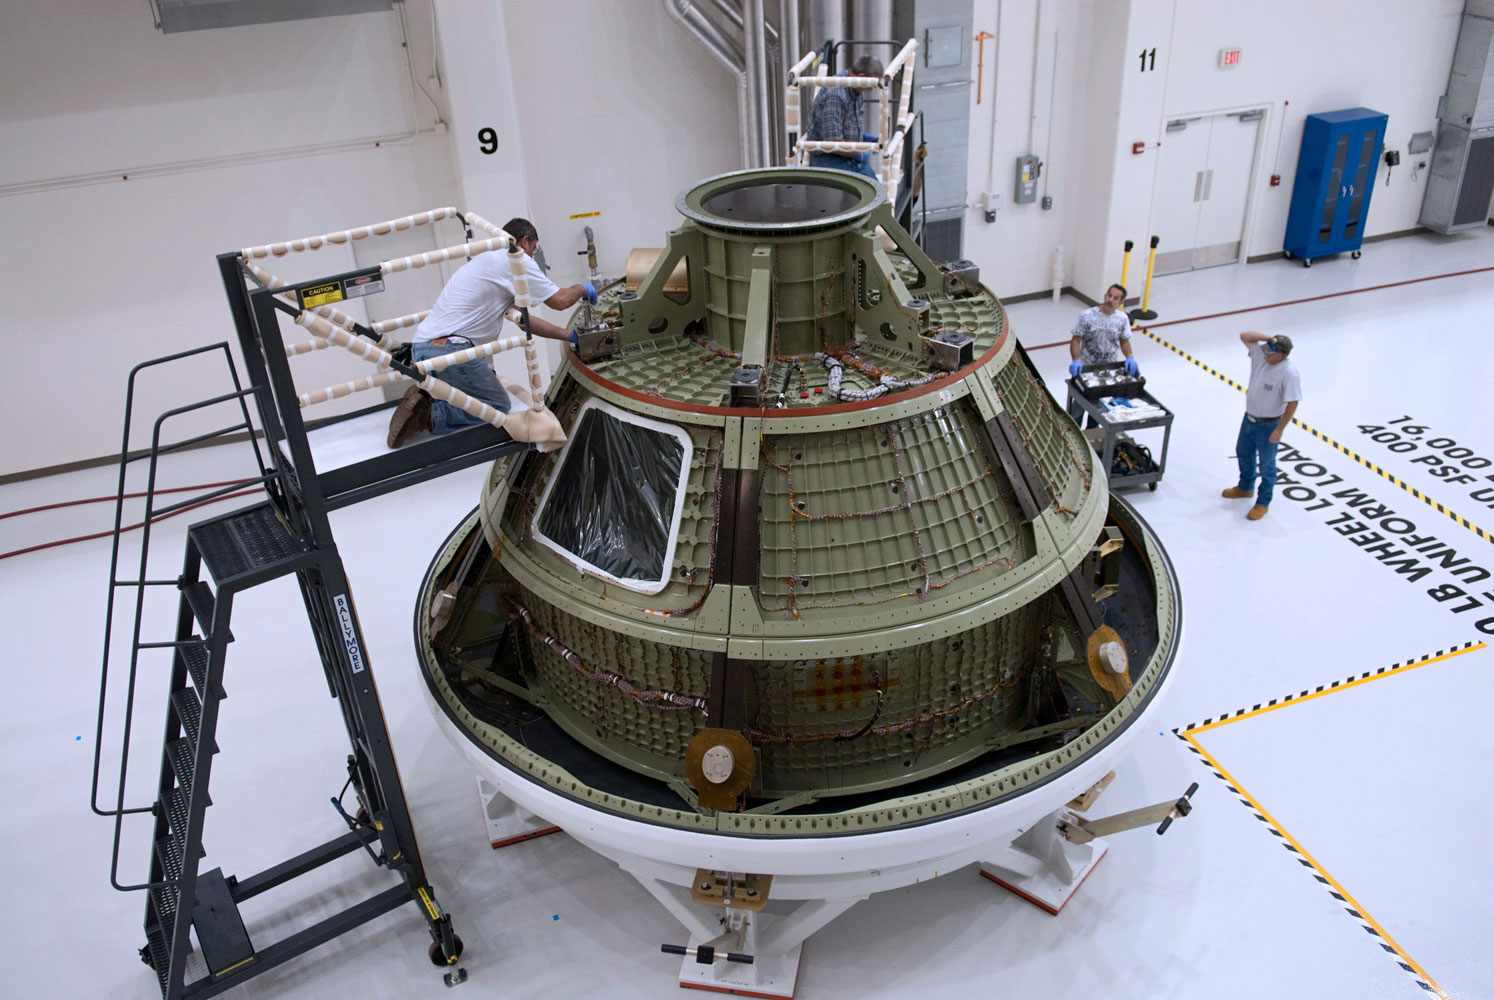 A test version of Orion arrived at the Kennedy Space Center on April 21, 2012. This model will be used for ground operations practice in advance of the first test flight.